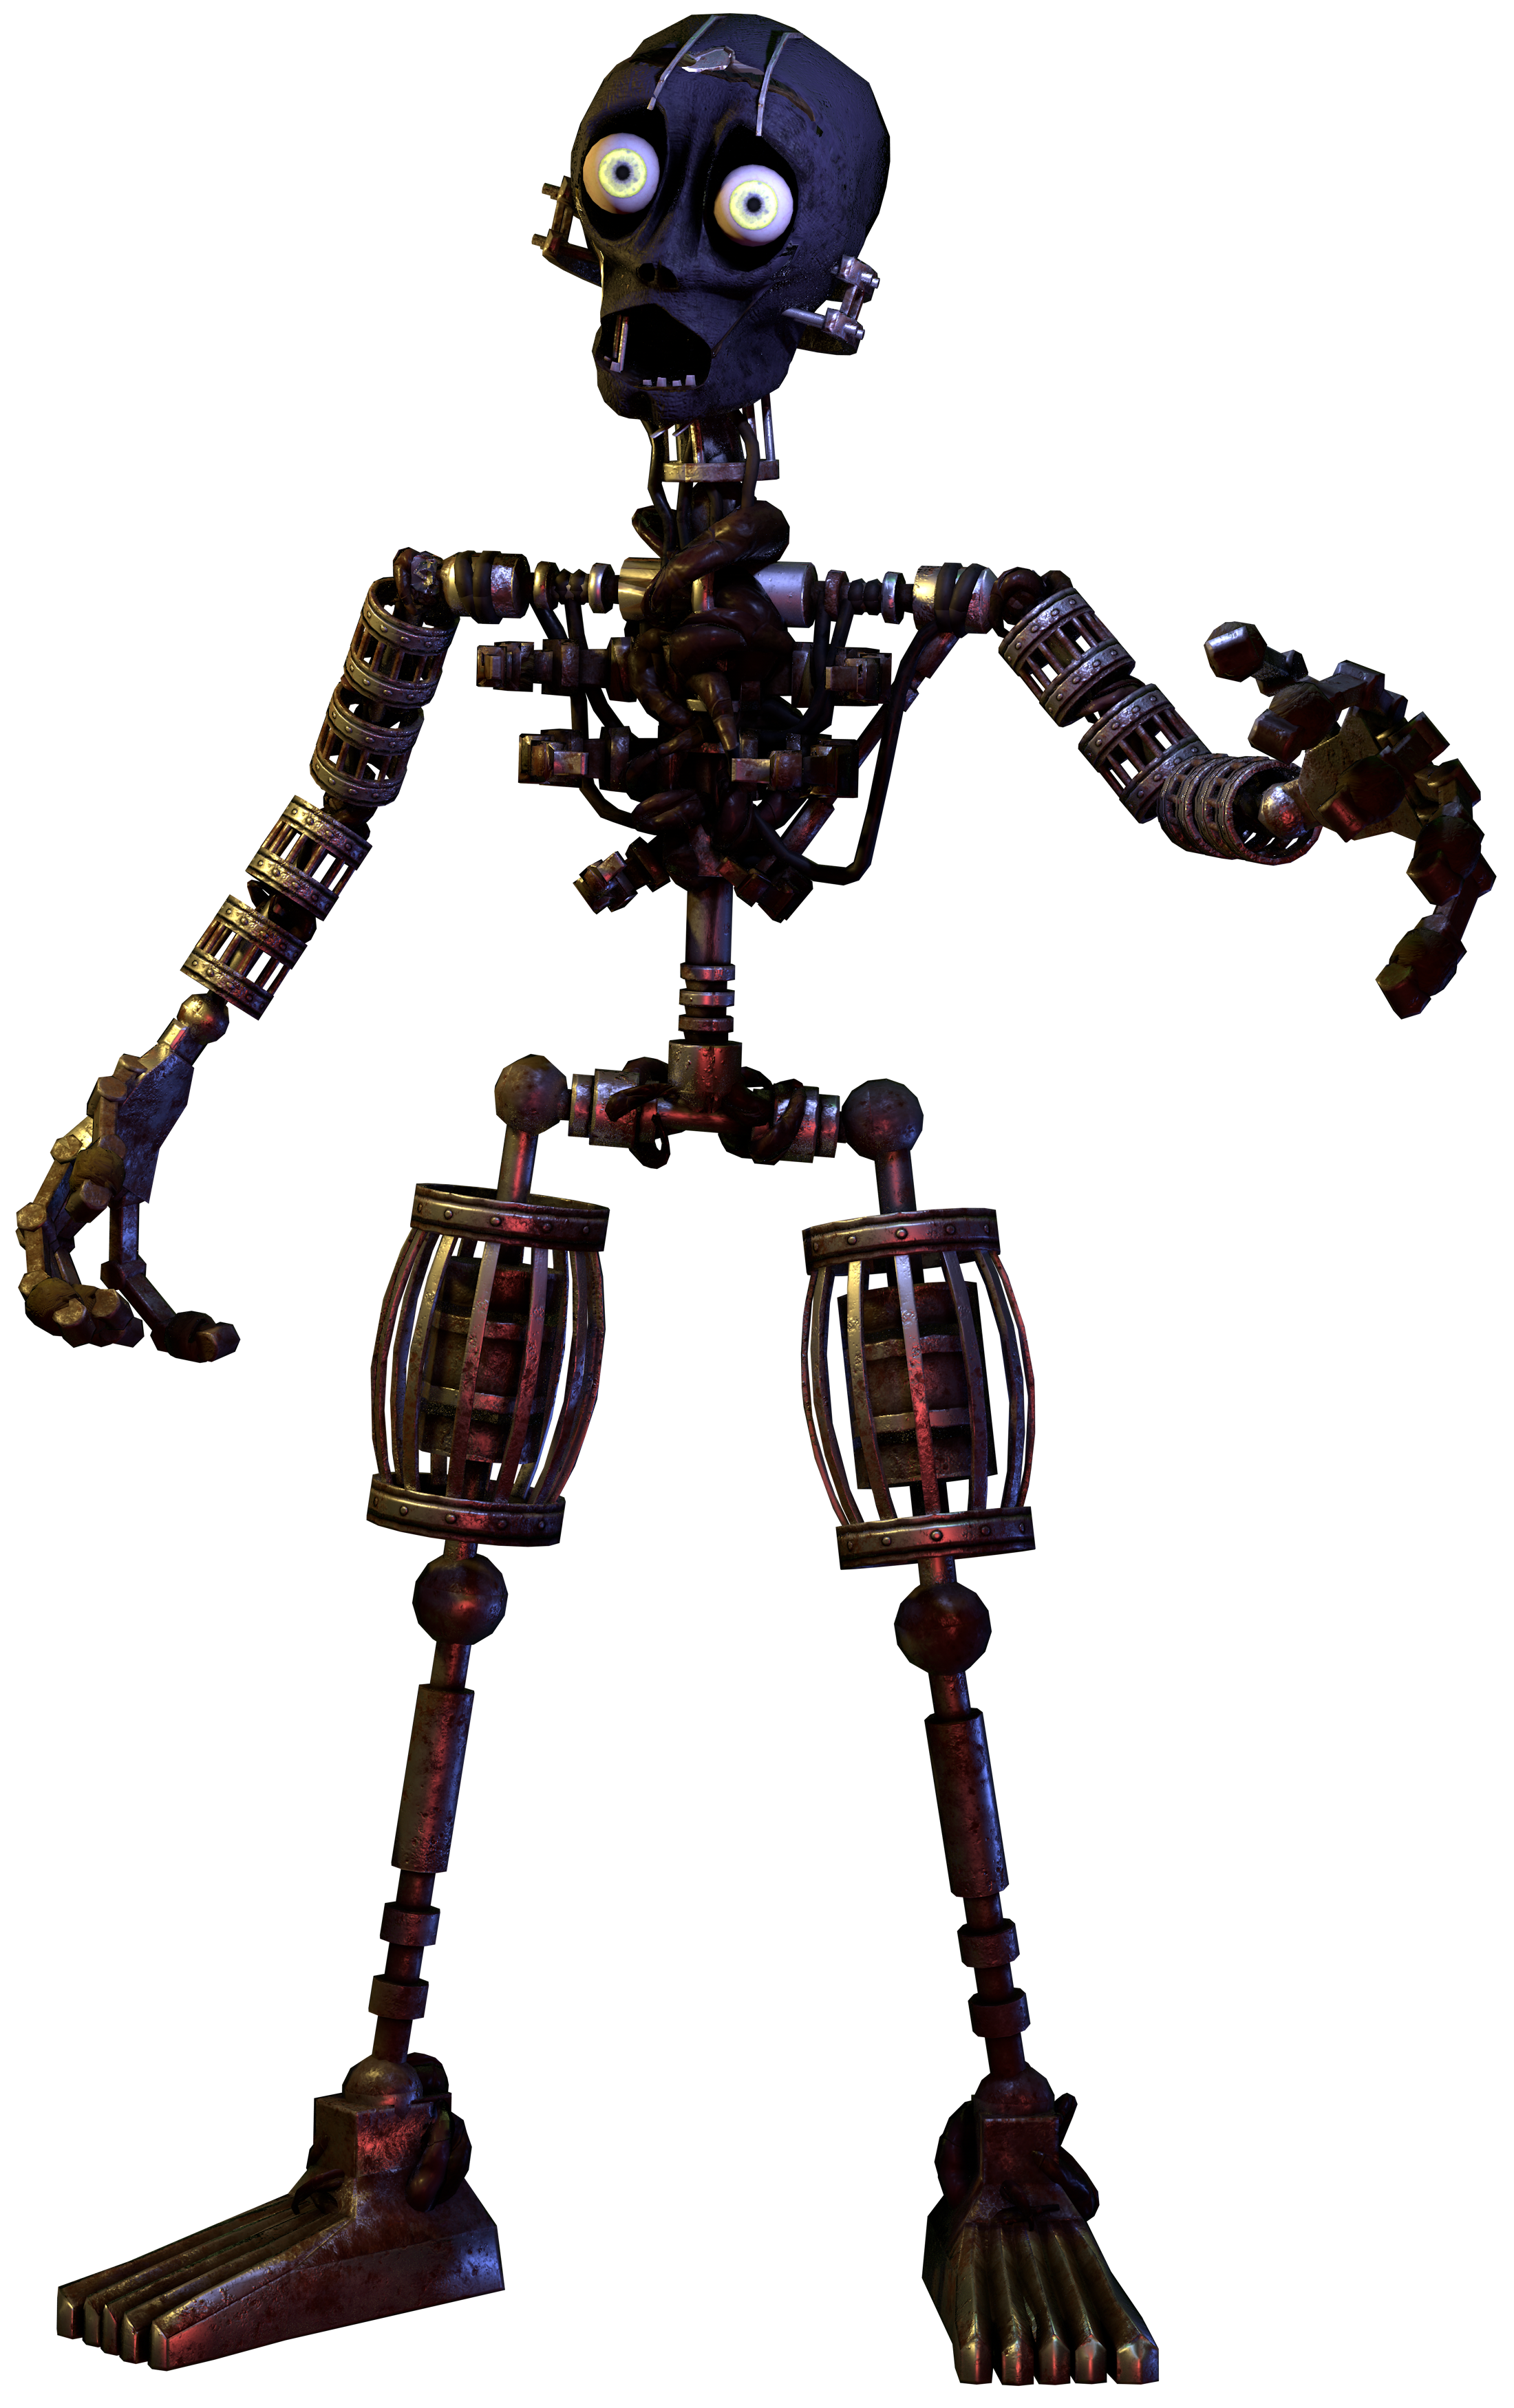 Molten freddy and his robot spaghetti (coloured with markers) : r